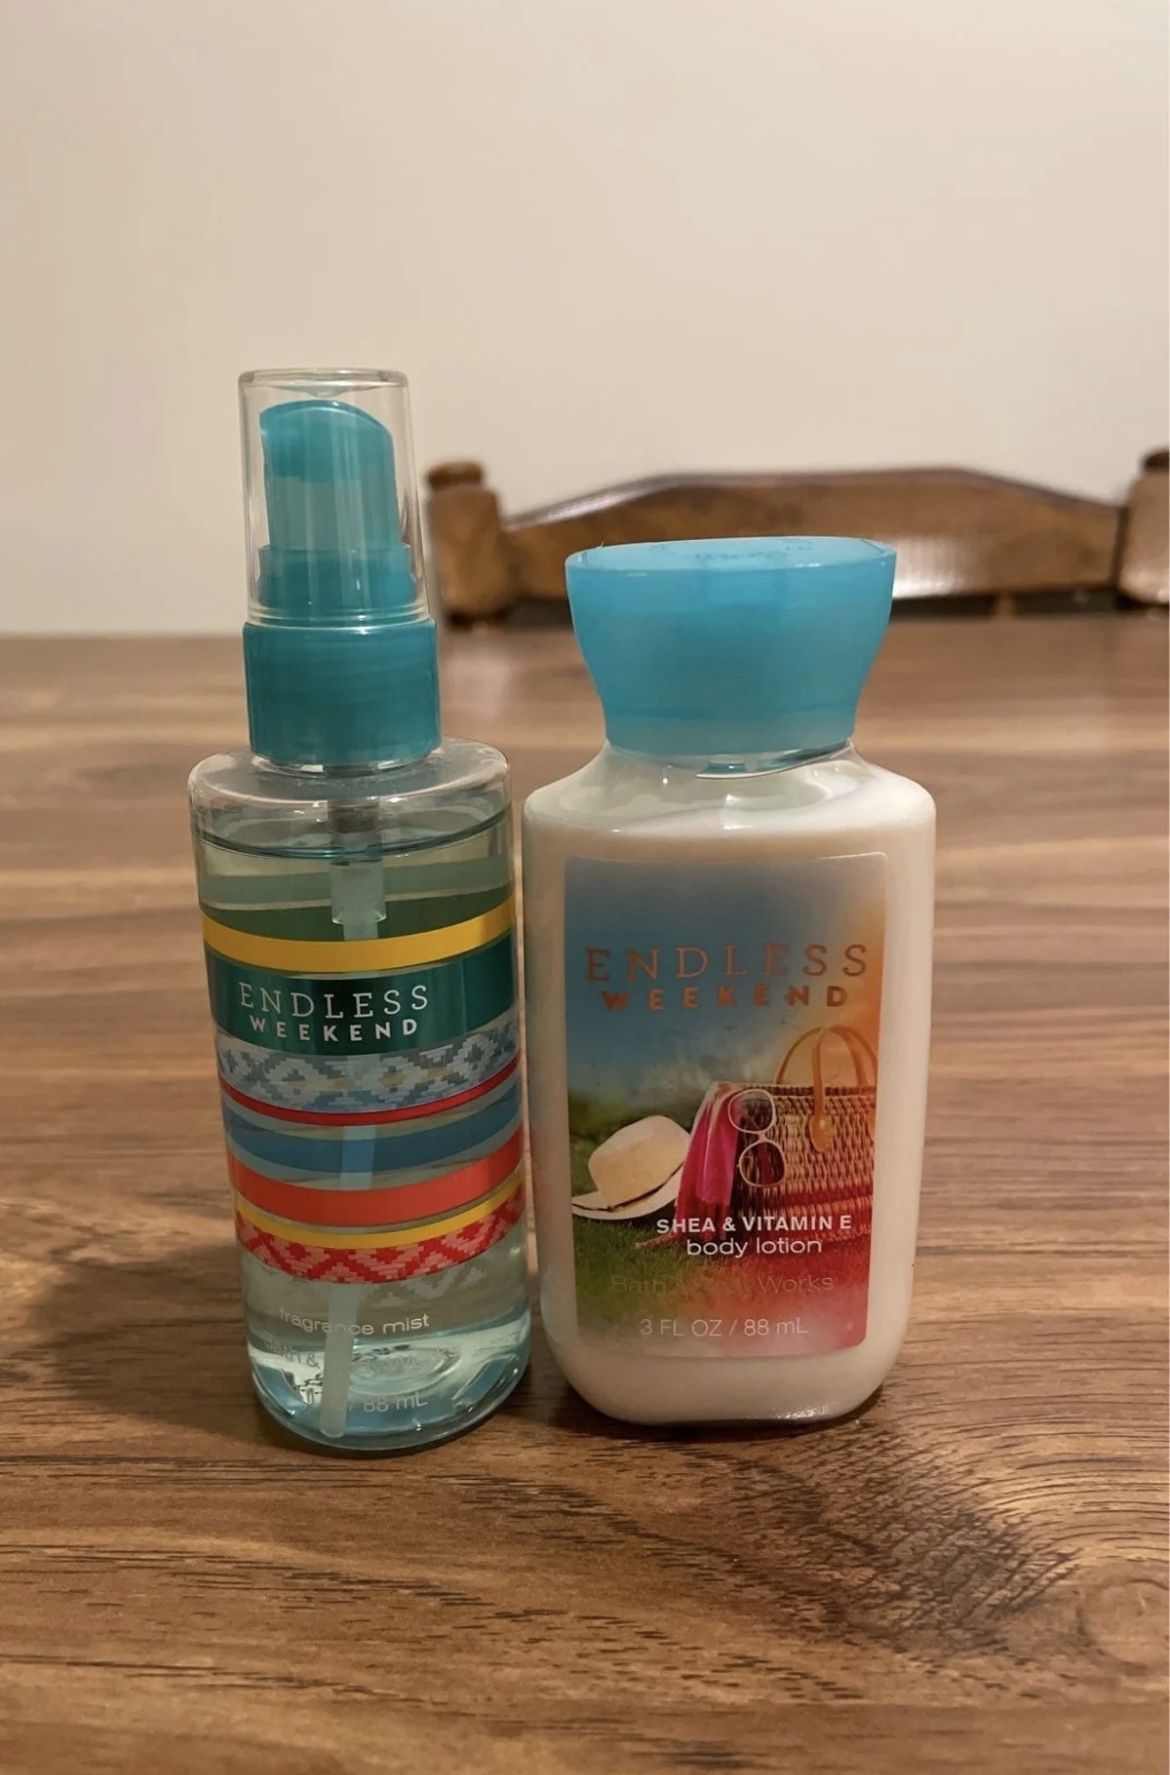 Bath & Body Works Endless Weekend Signature Collection